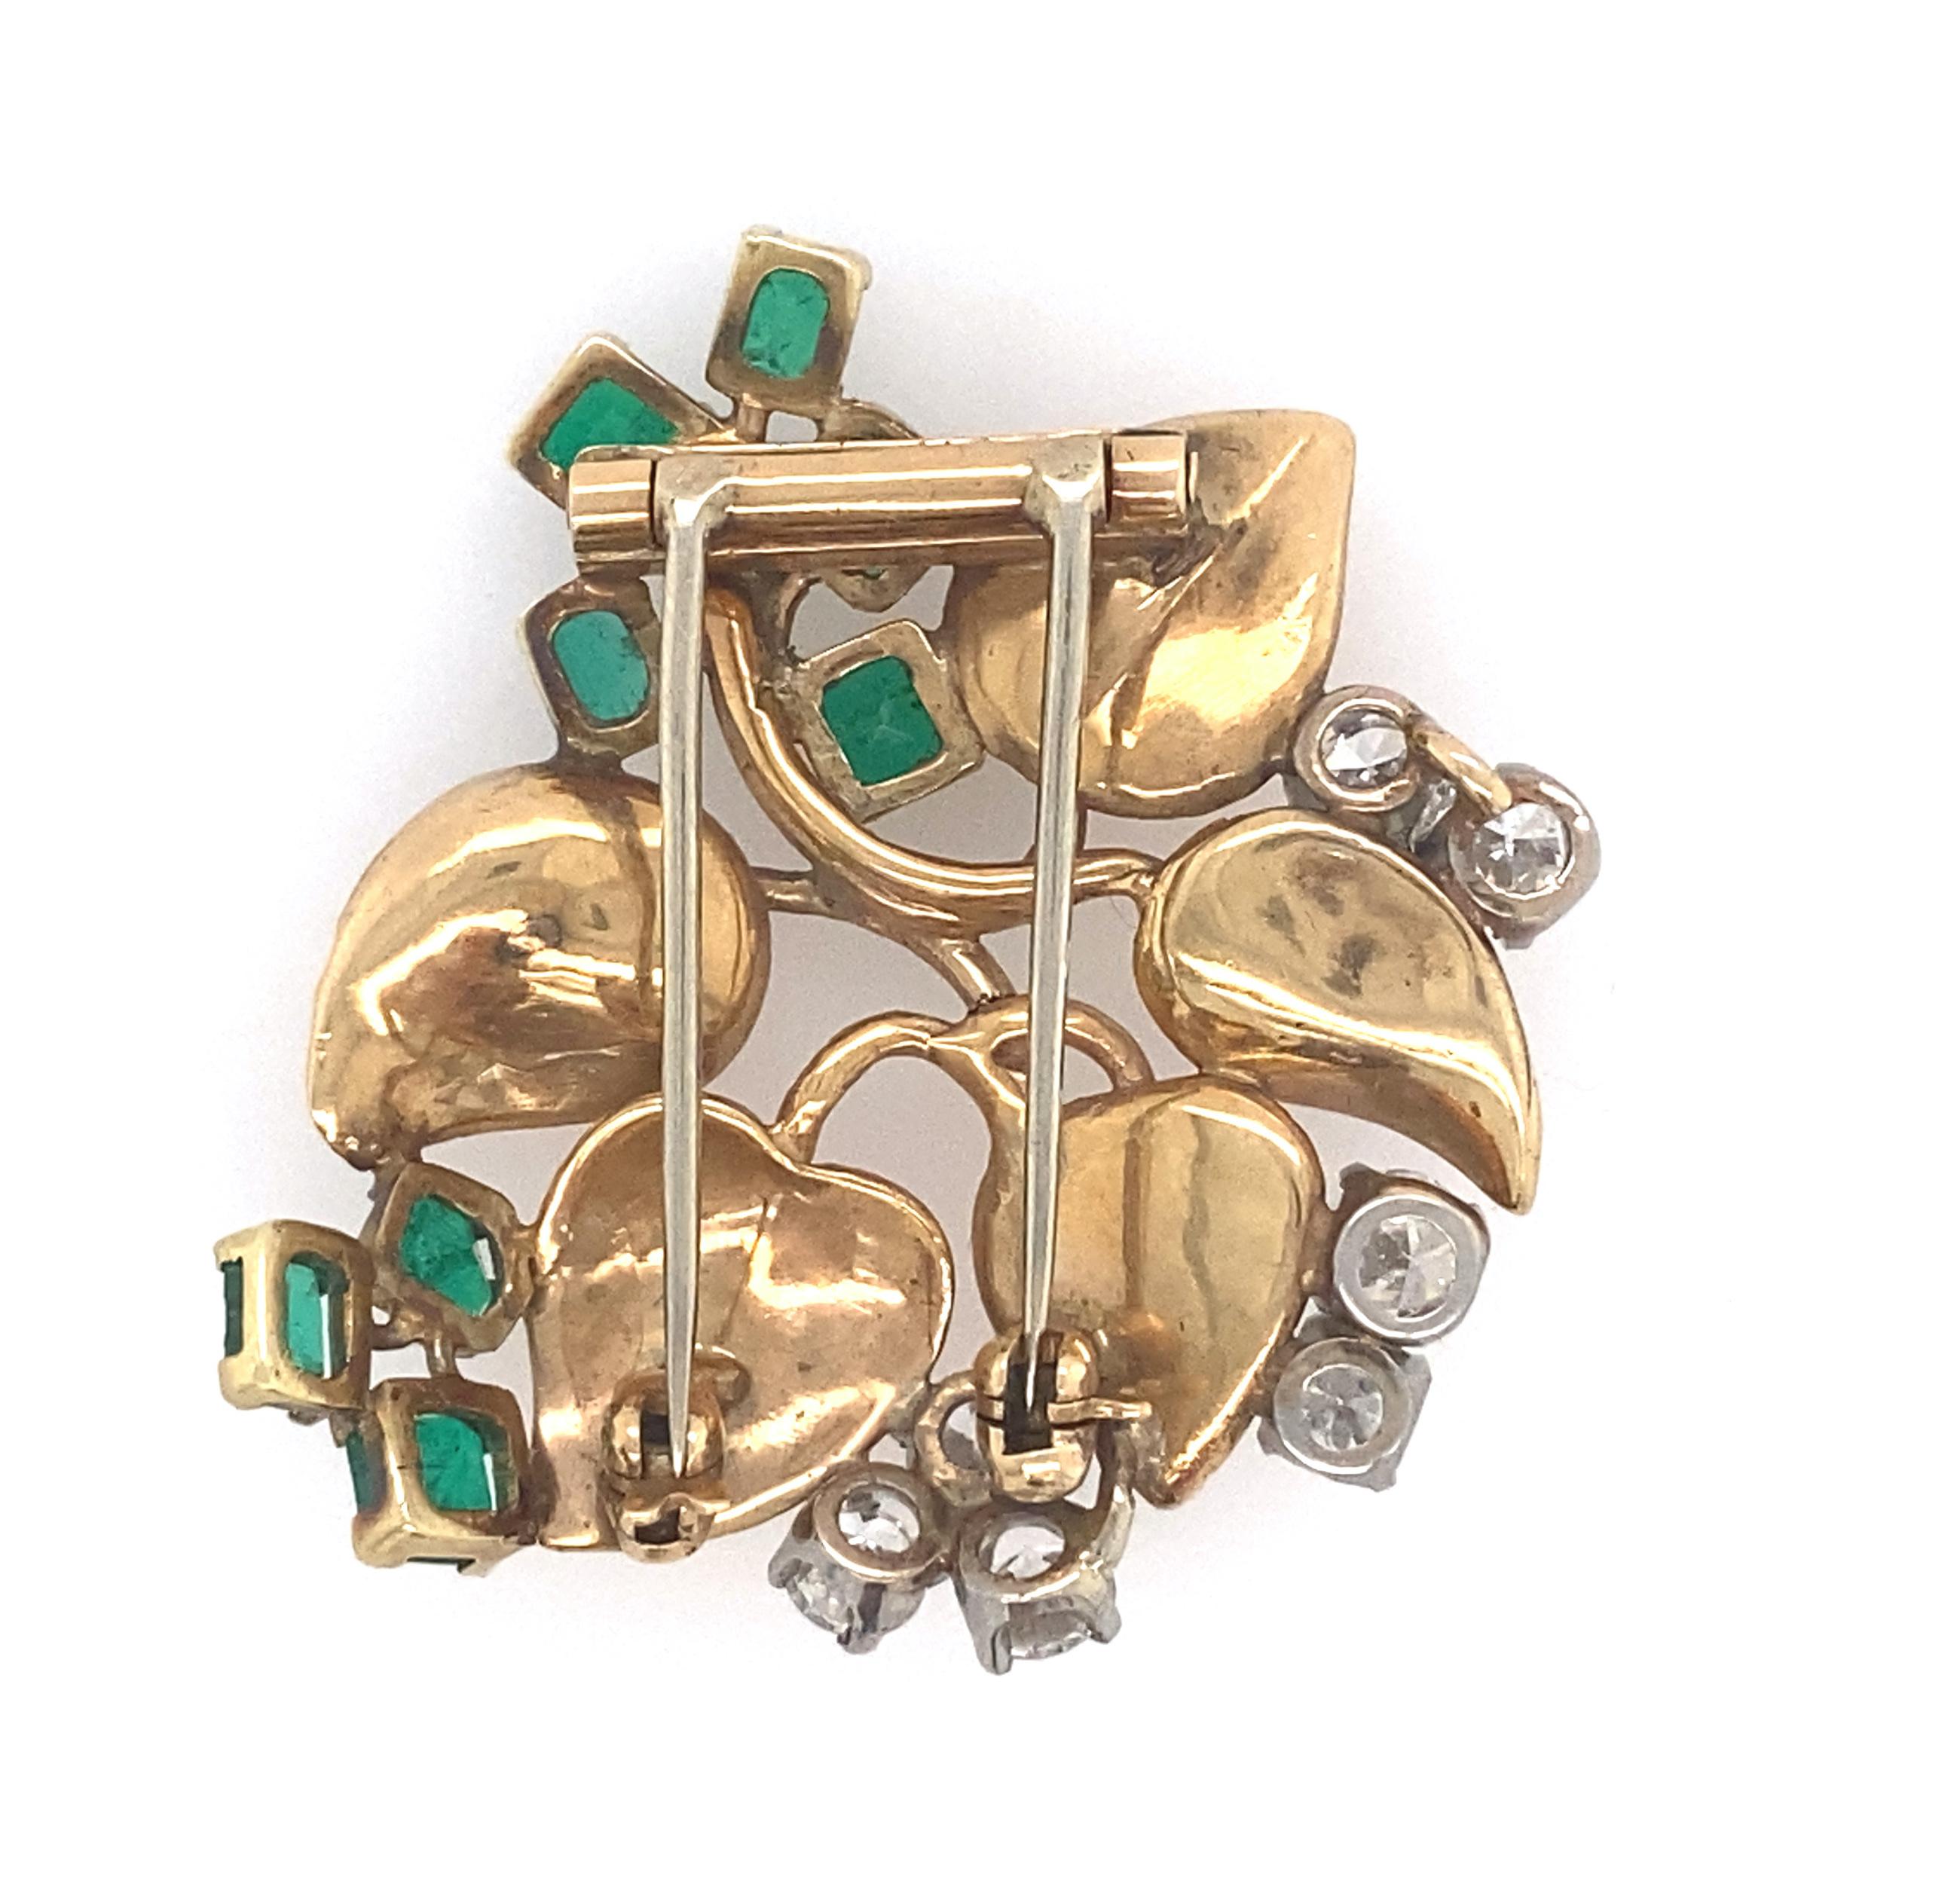 Seaman Schepps Gold, Diamond and Emerald Leaf Clip-Brooch
7 old European and transitional-cut diamonds ap. 1.55 cts., 
8 rectangular step-cut emeralds ap. 2.00 cts., 
signed Seaman Schepps, c. 1940, ap. 10.4 dwts.
measurements 1 5/8 x 1 5/8 inches.